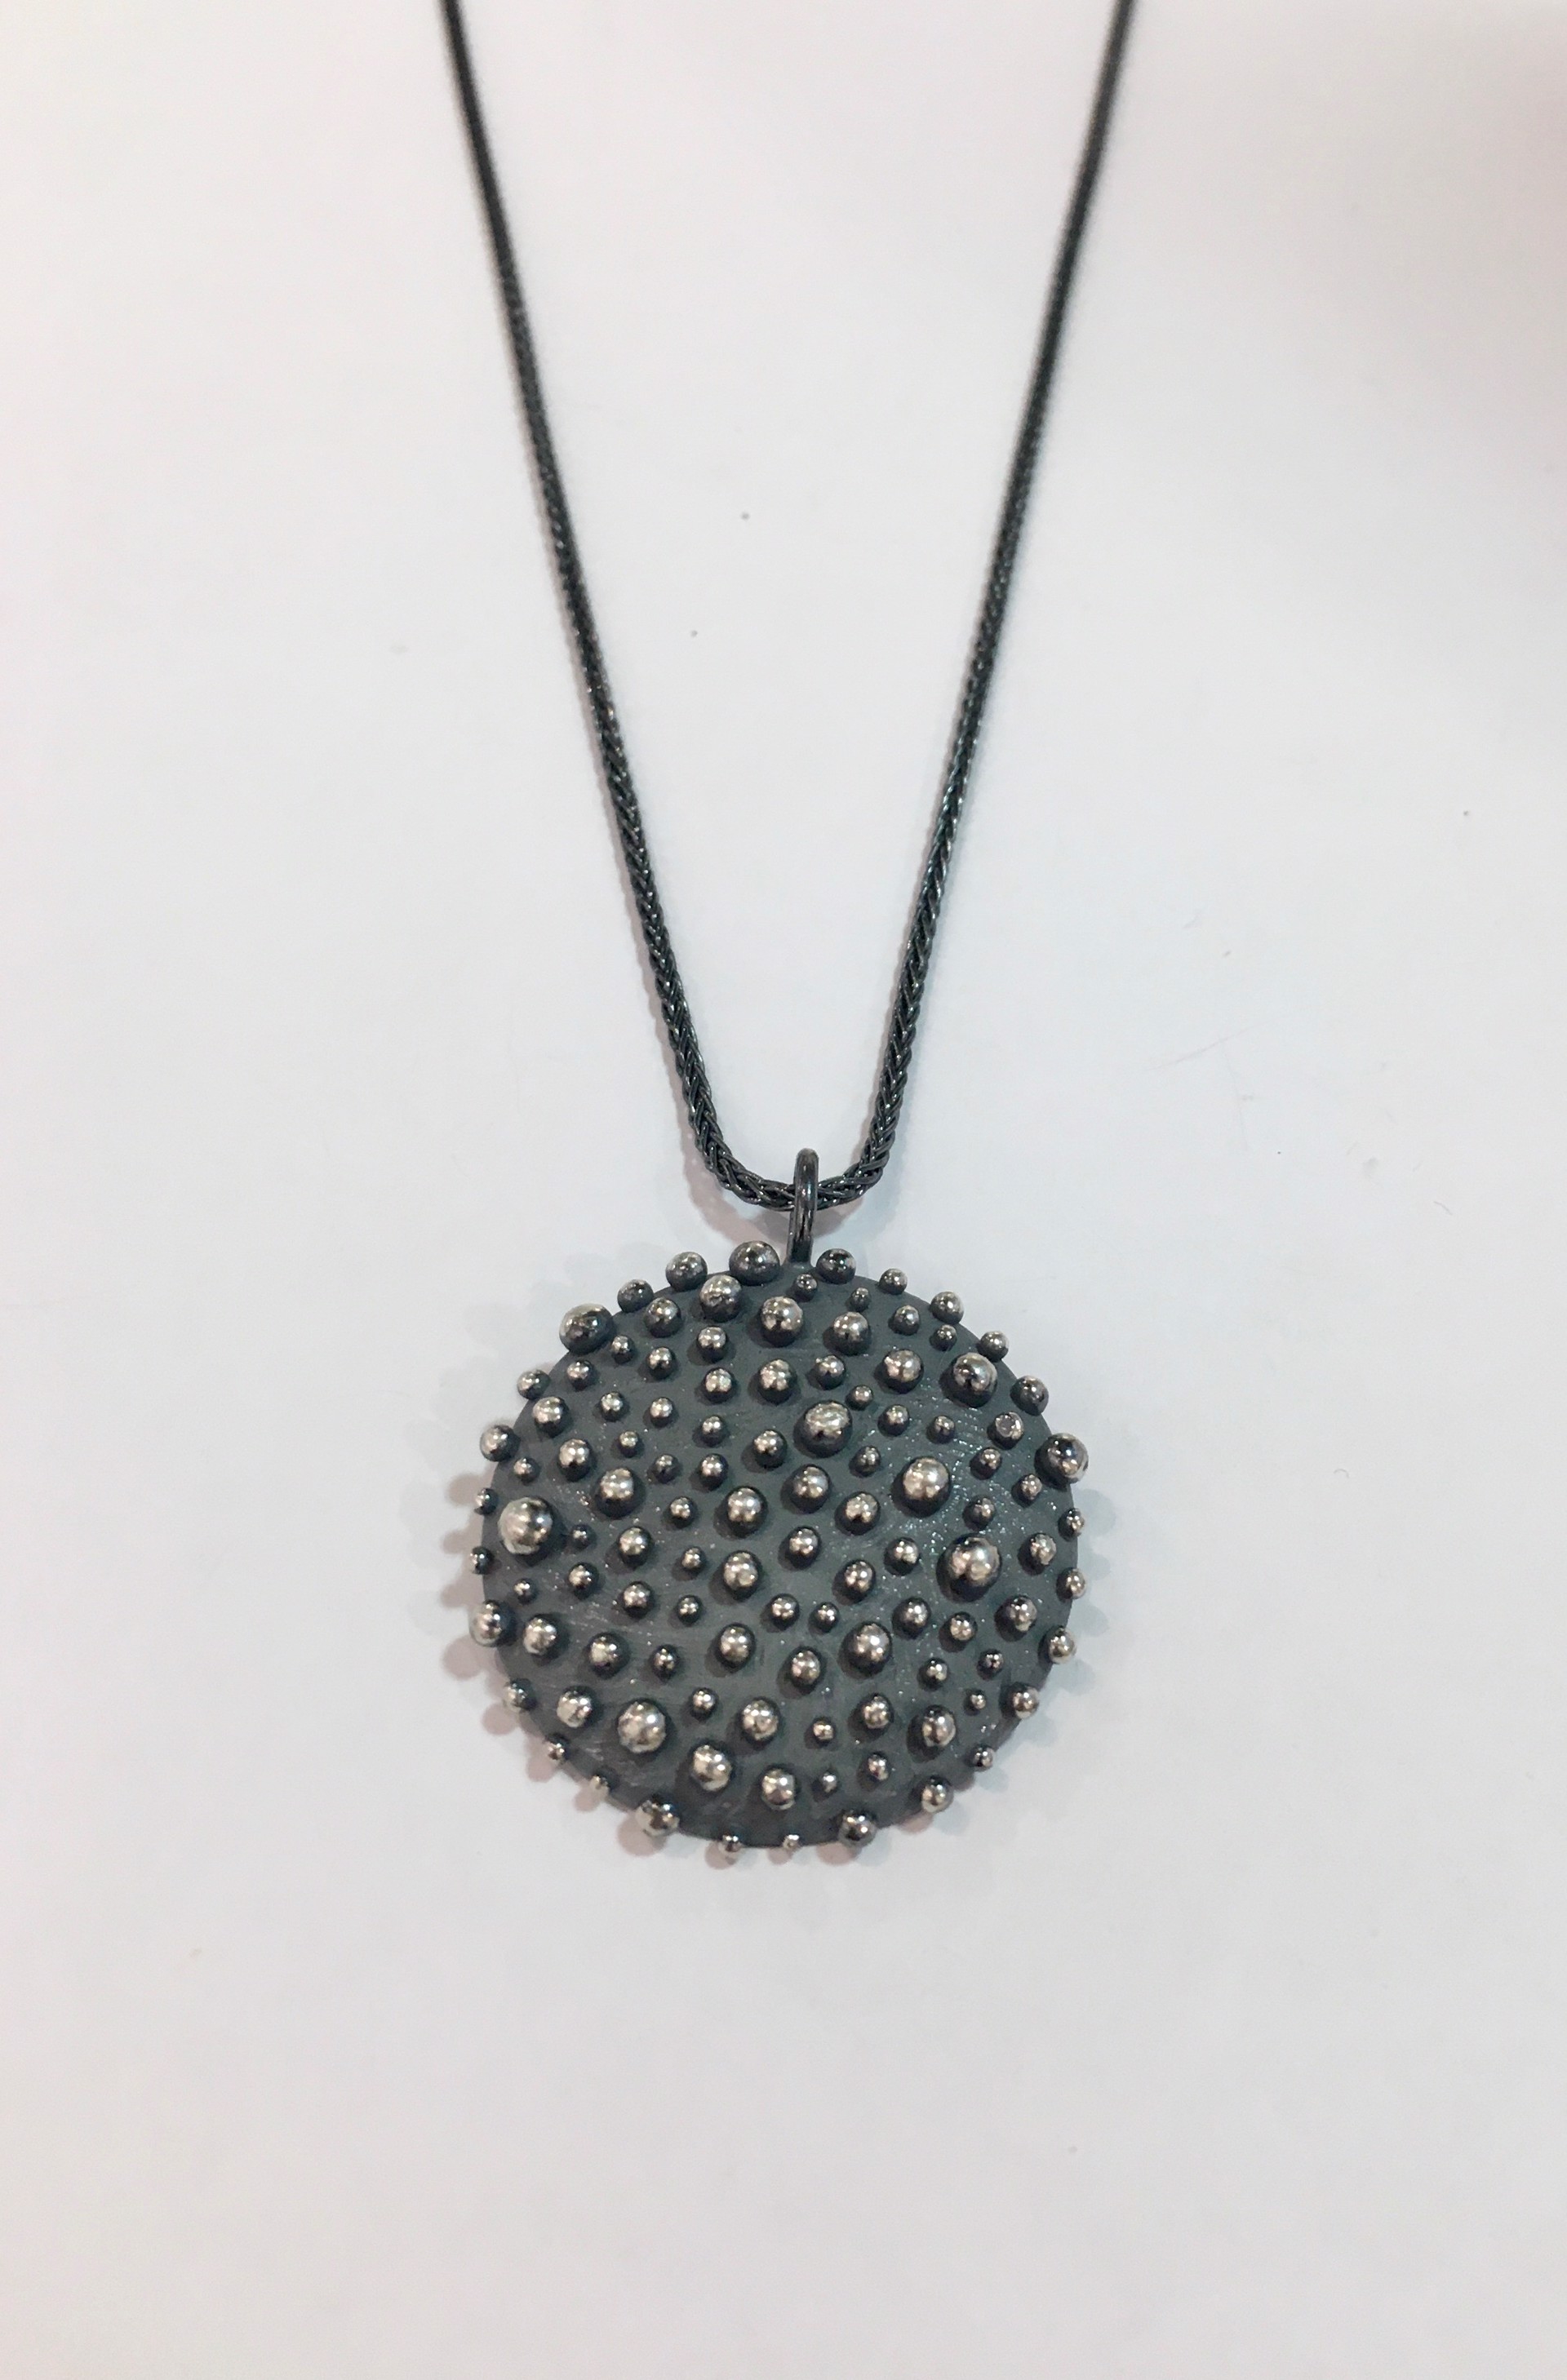 Oxidized Silver Pendant and Chain by DAHLIA KANNER